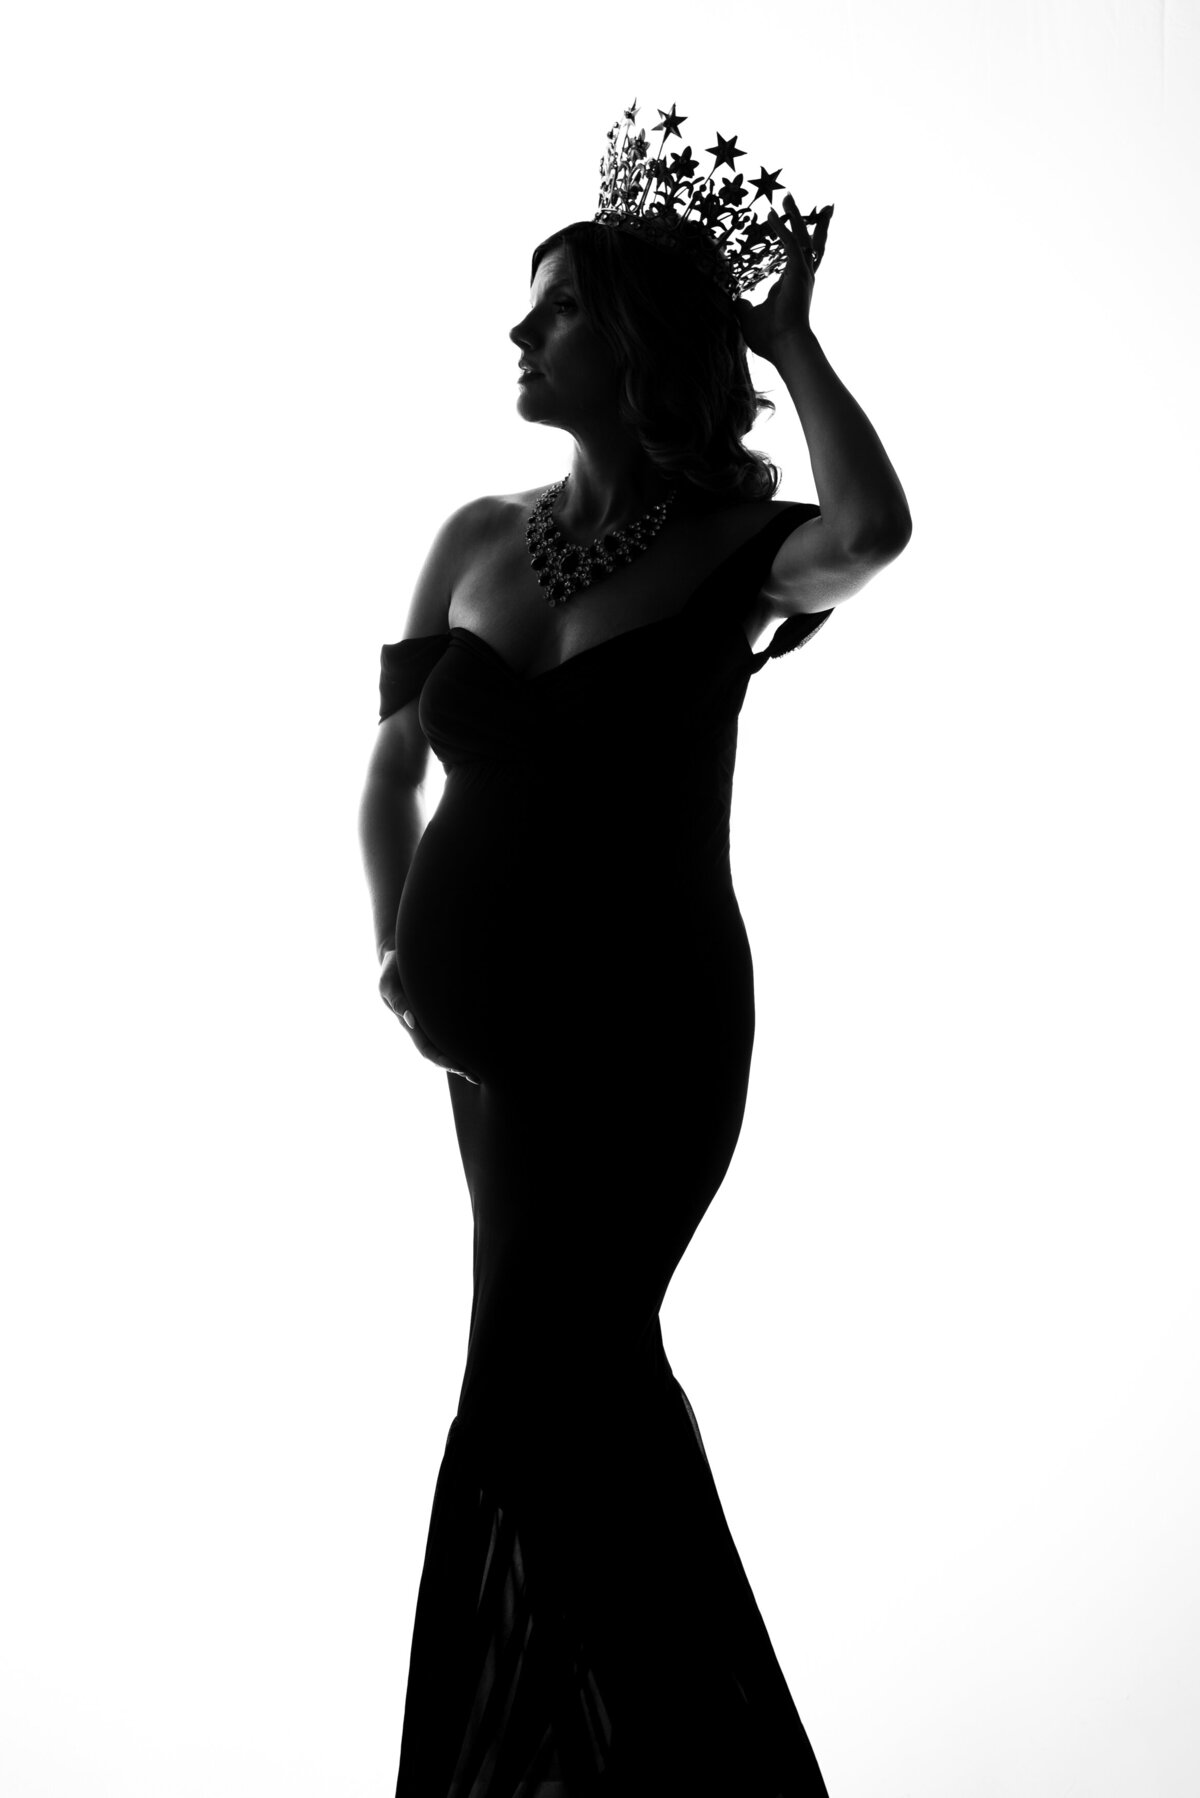 st-louis-maternity-photographer-pregnancy-silhouette-with-crown